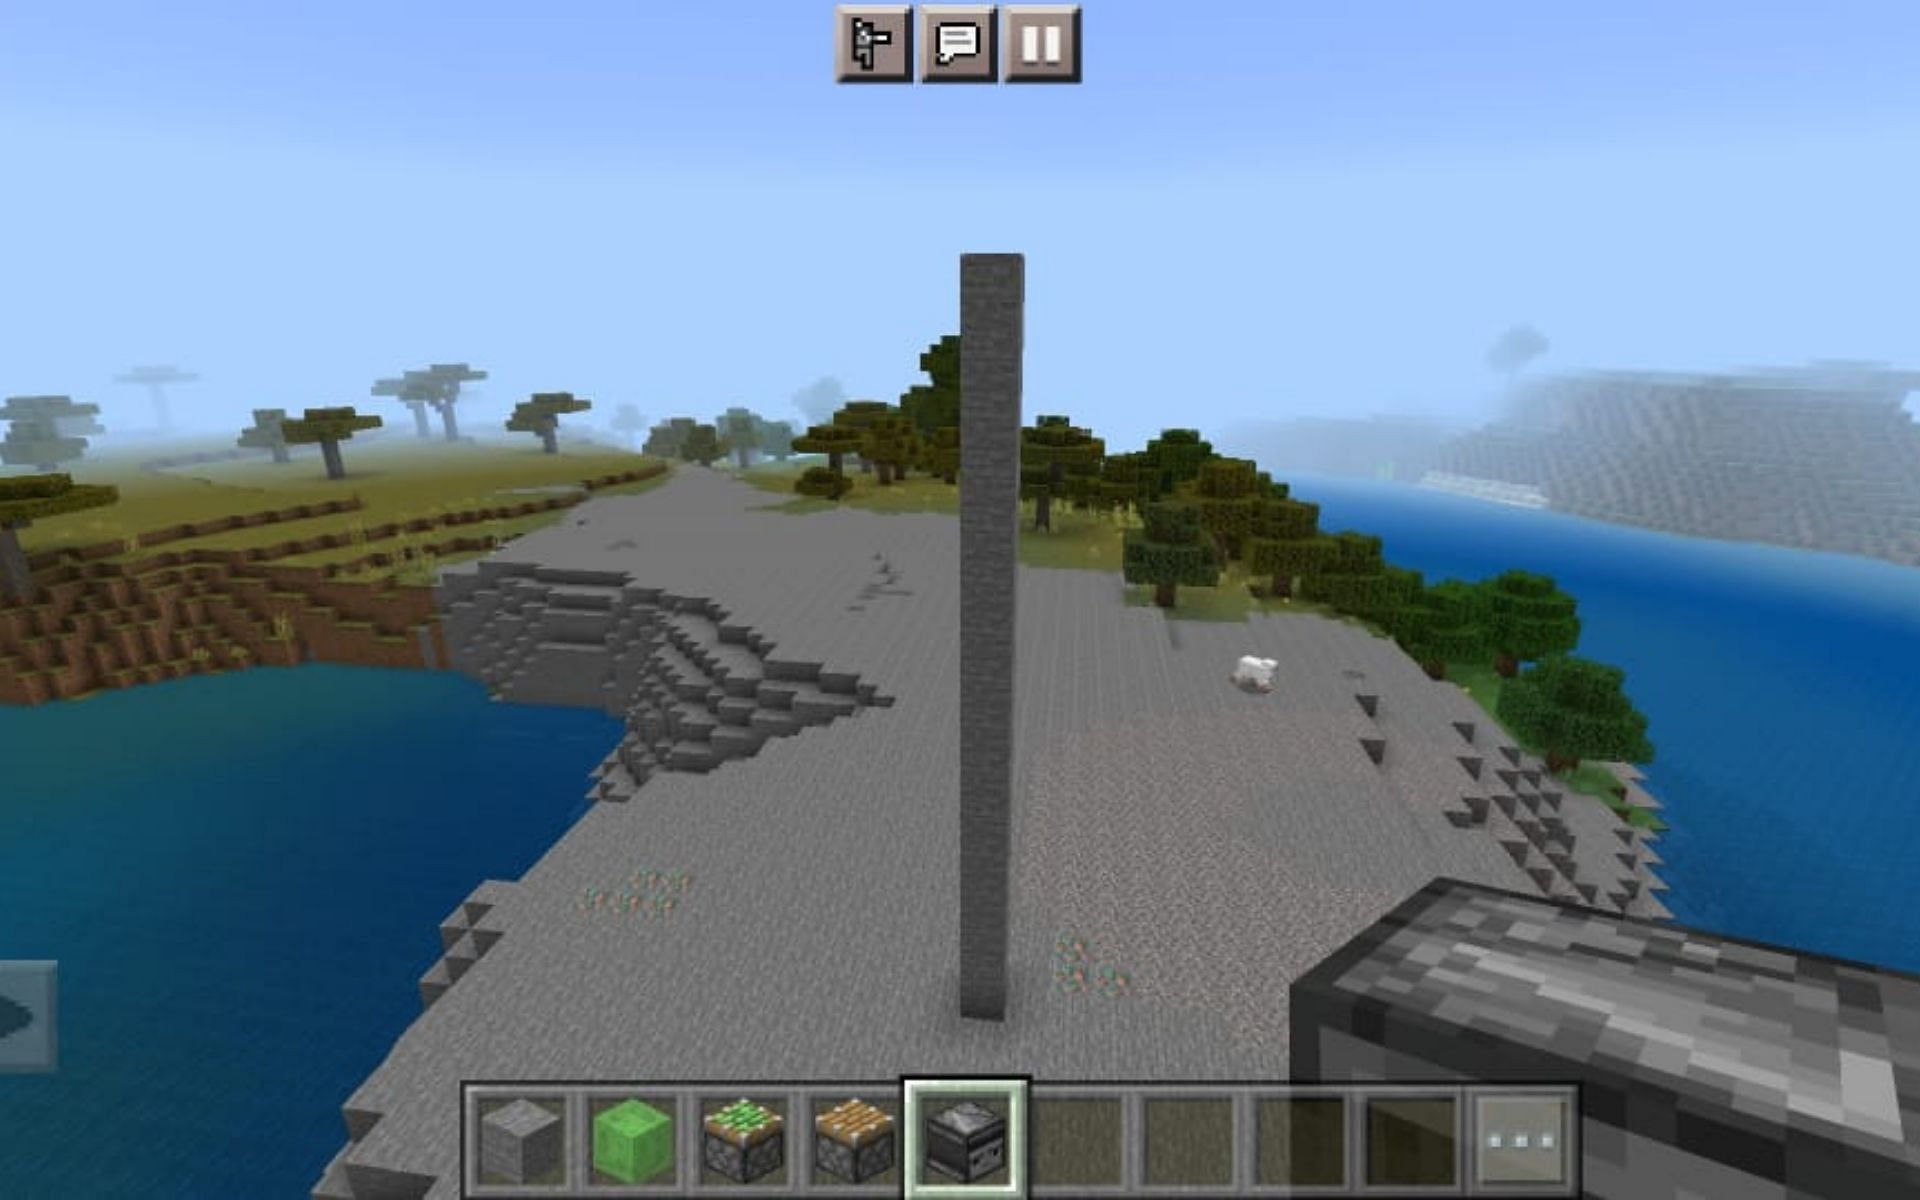 Build as high as possible (Image via Minecraft)